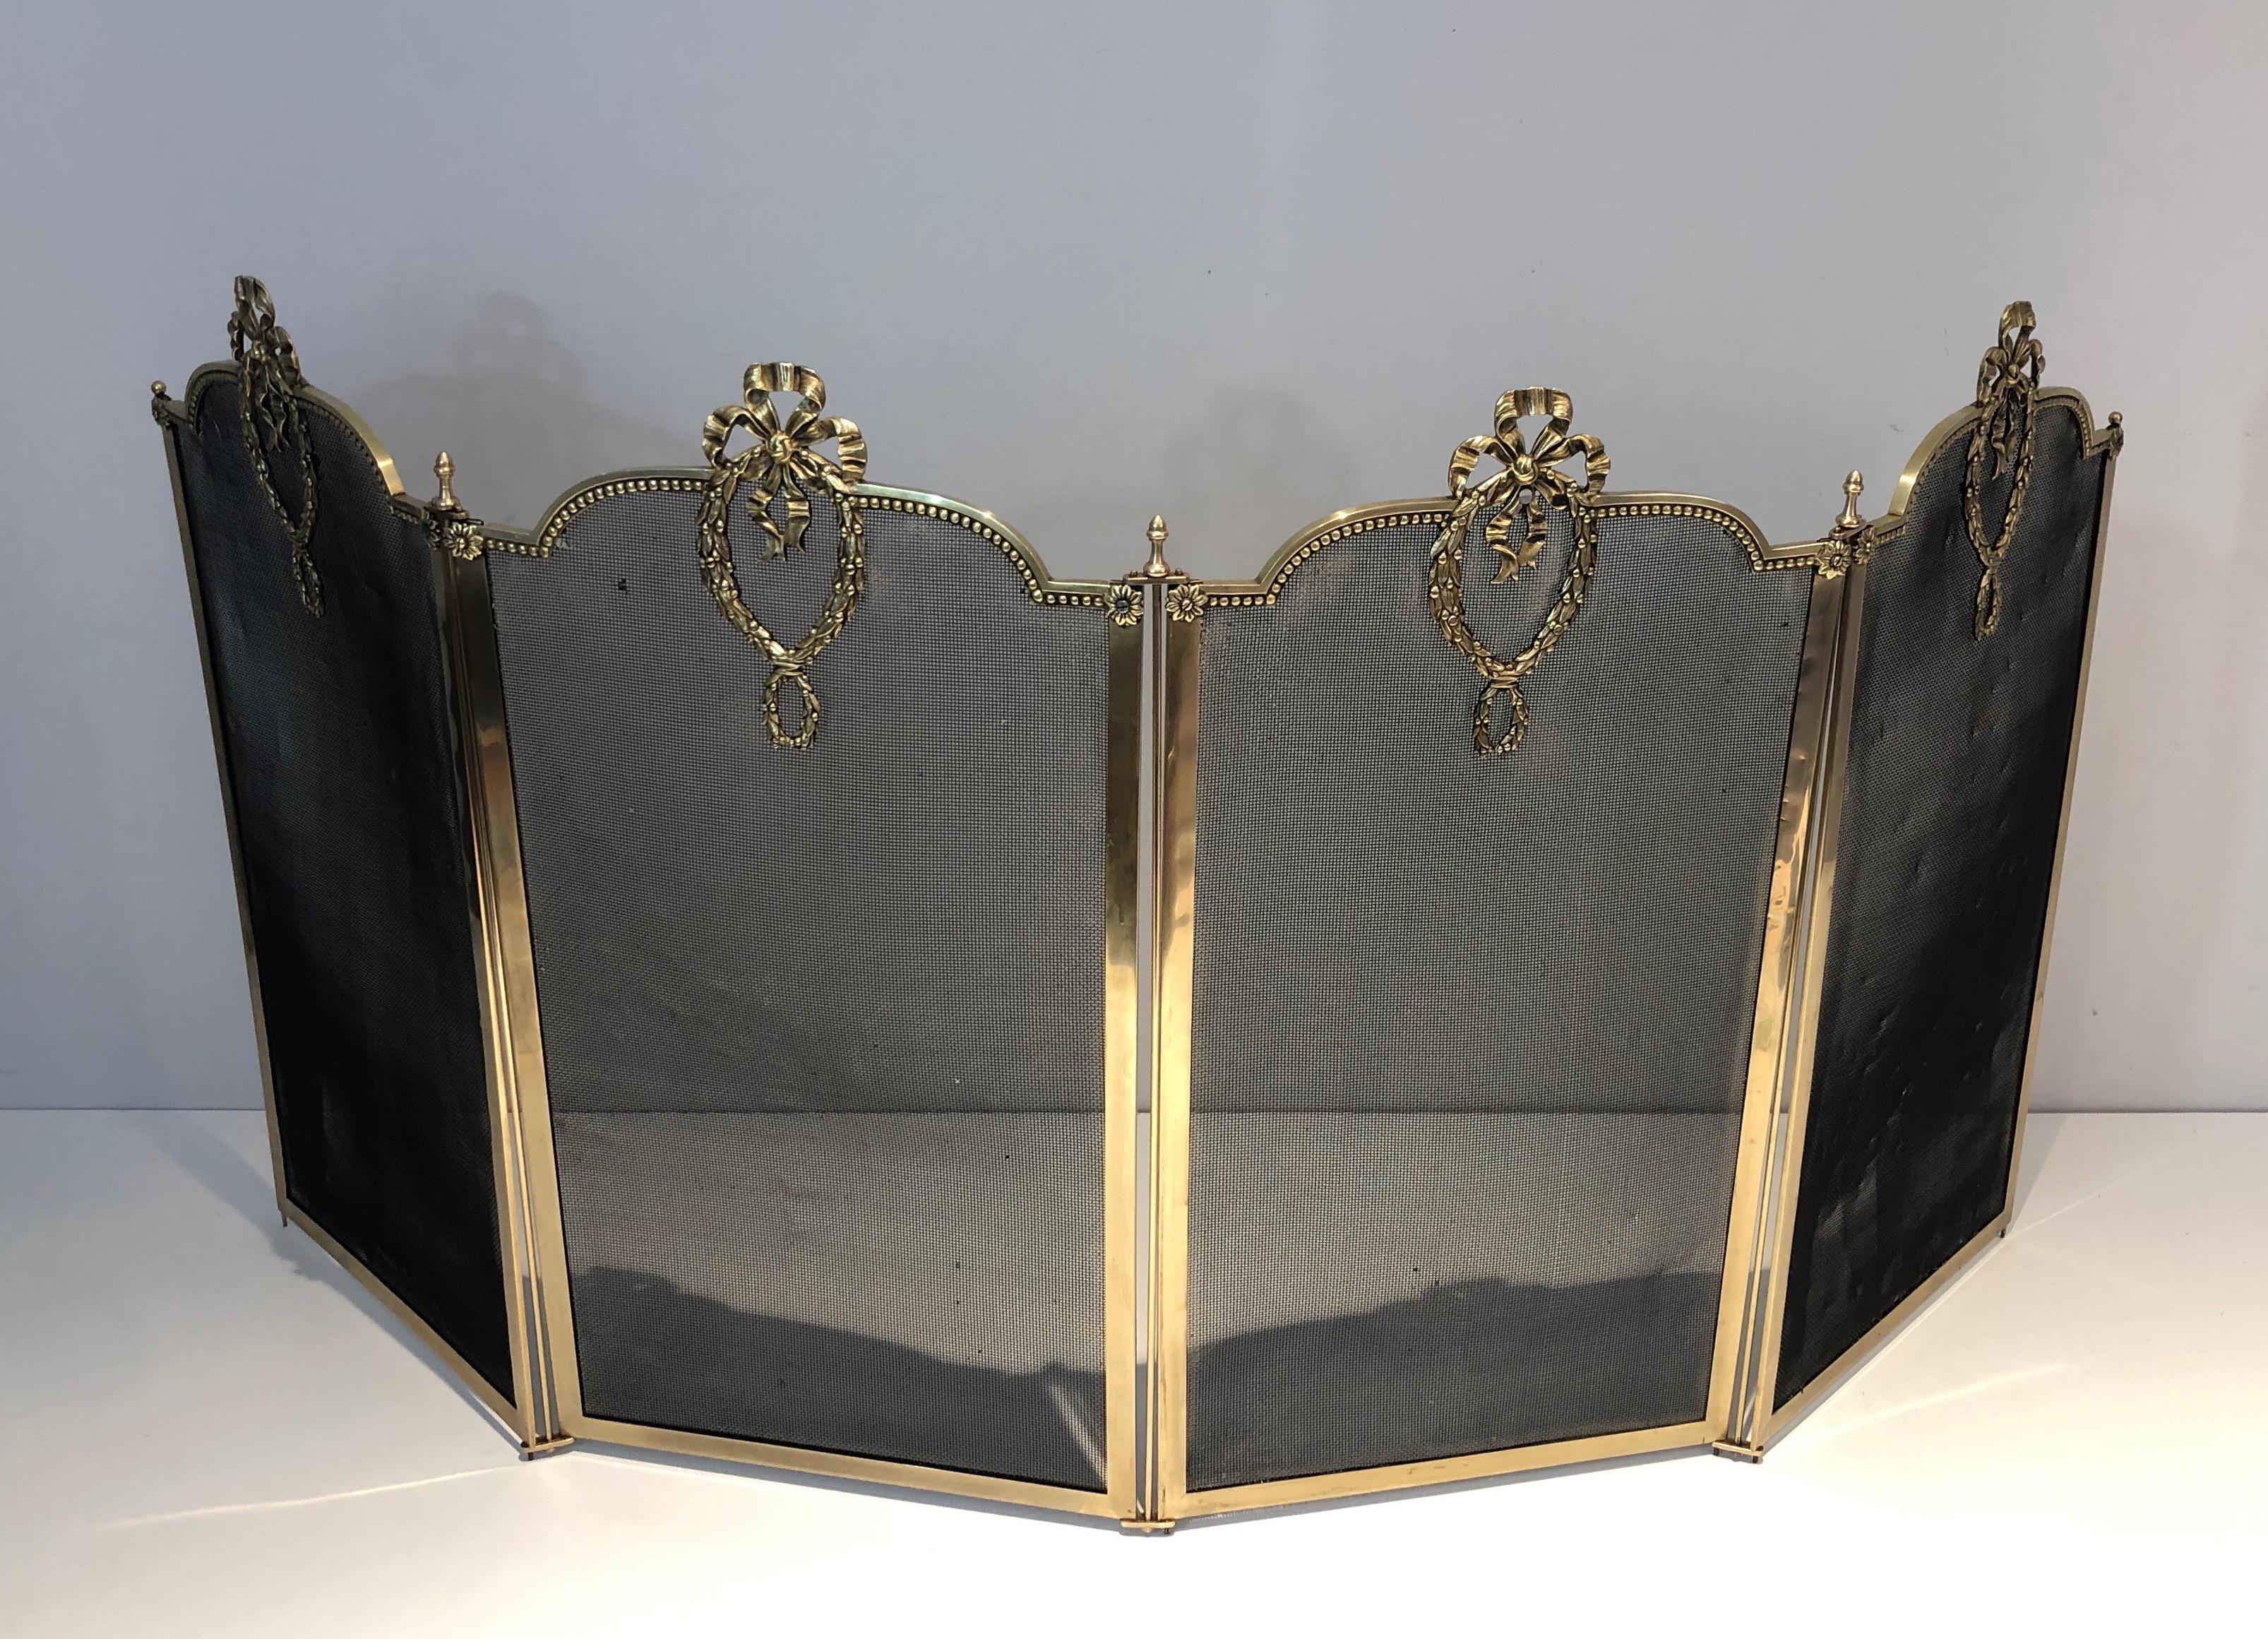 This Louis the 16th style 4 panels folding fireplace screen is made of brass and grilling. This firewall is decorated with bows, ribbons and garlands. This is a  French work, circa 1900.